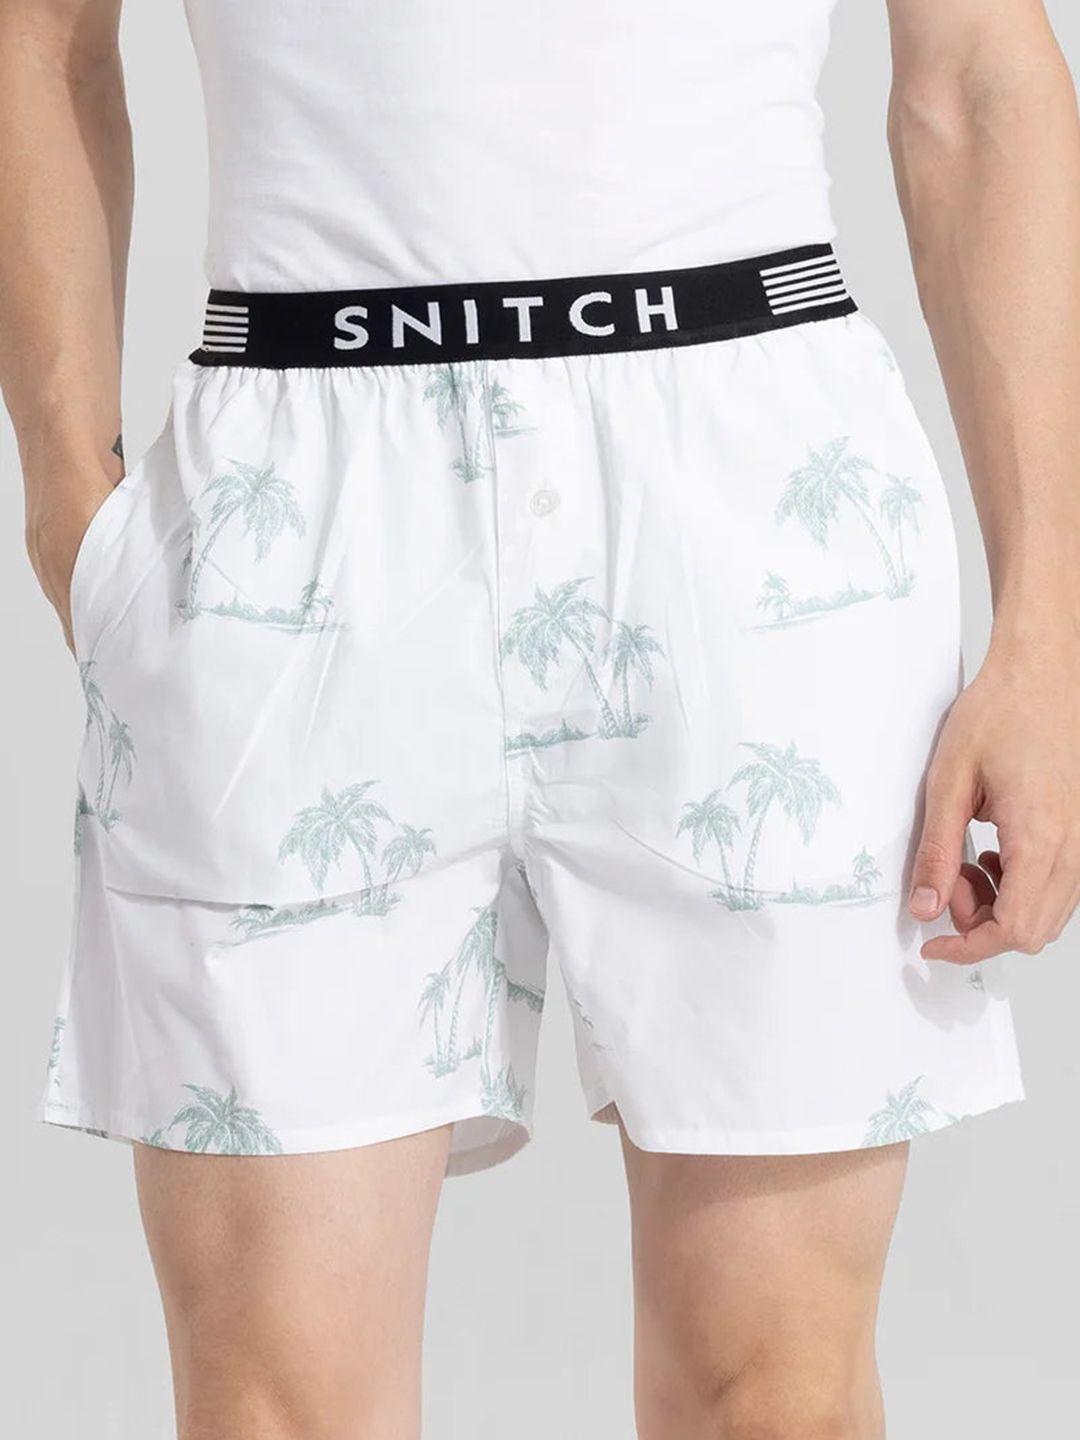 snitch white & sea green printed cotton outer elastic boxers 4msbx9217-07-s